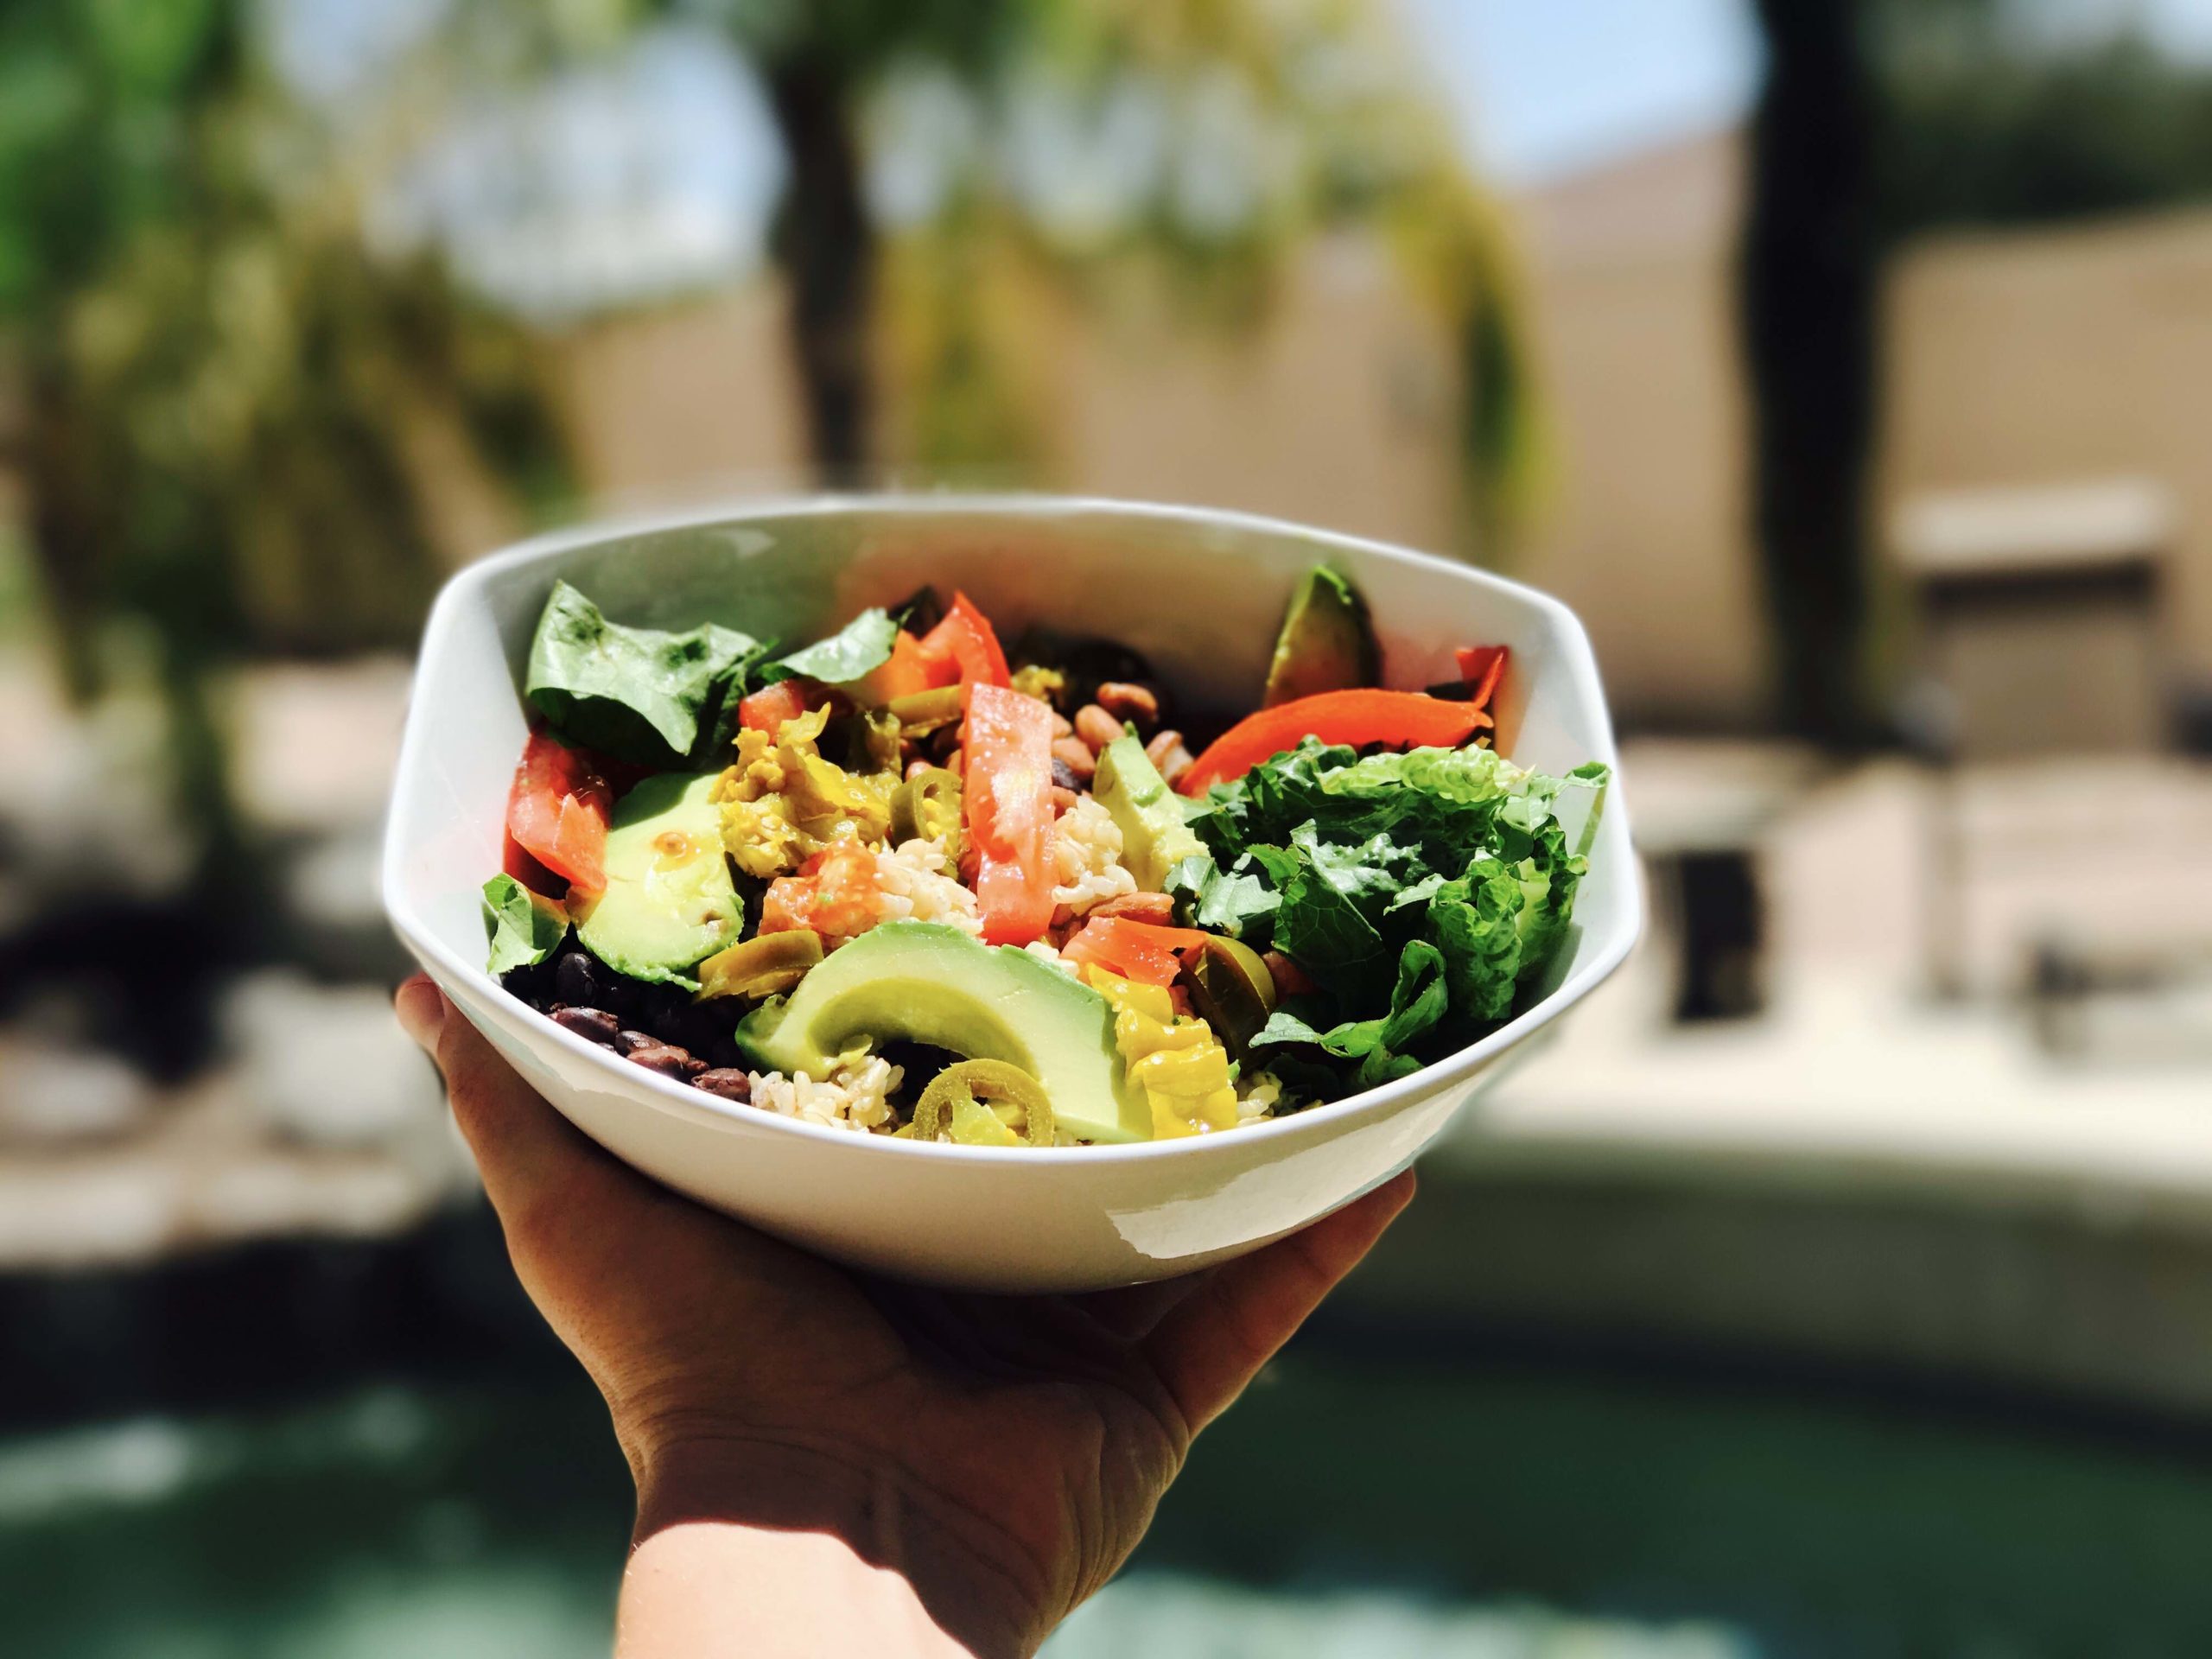 Vegan bodybuilder Robert Cheeke's hand holding up a plant-based burrito bowl, full of greens and grains, outside in the sunlight